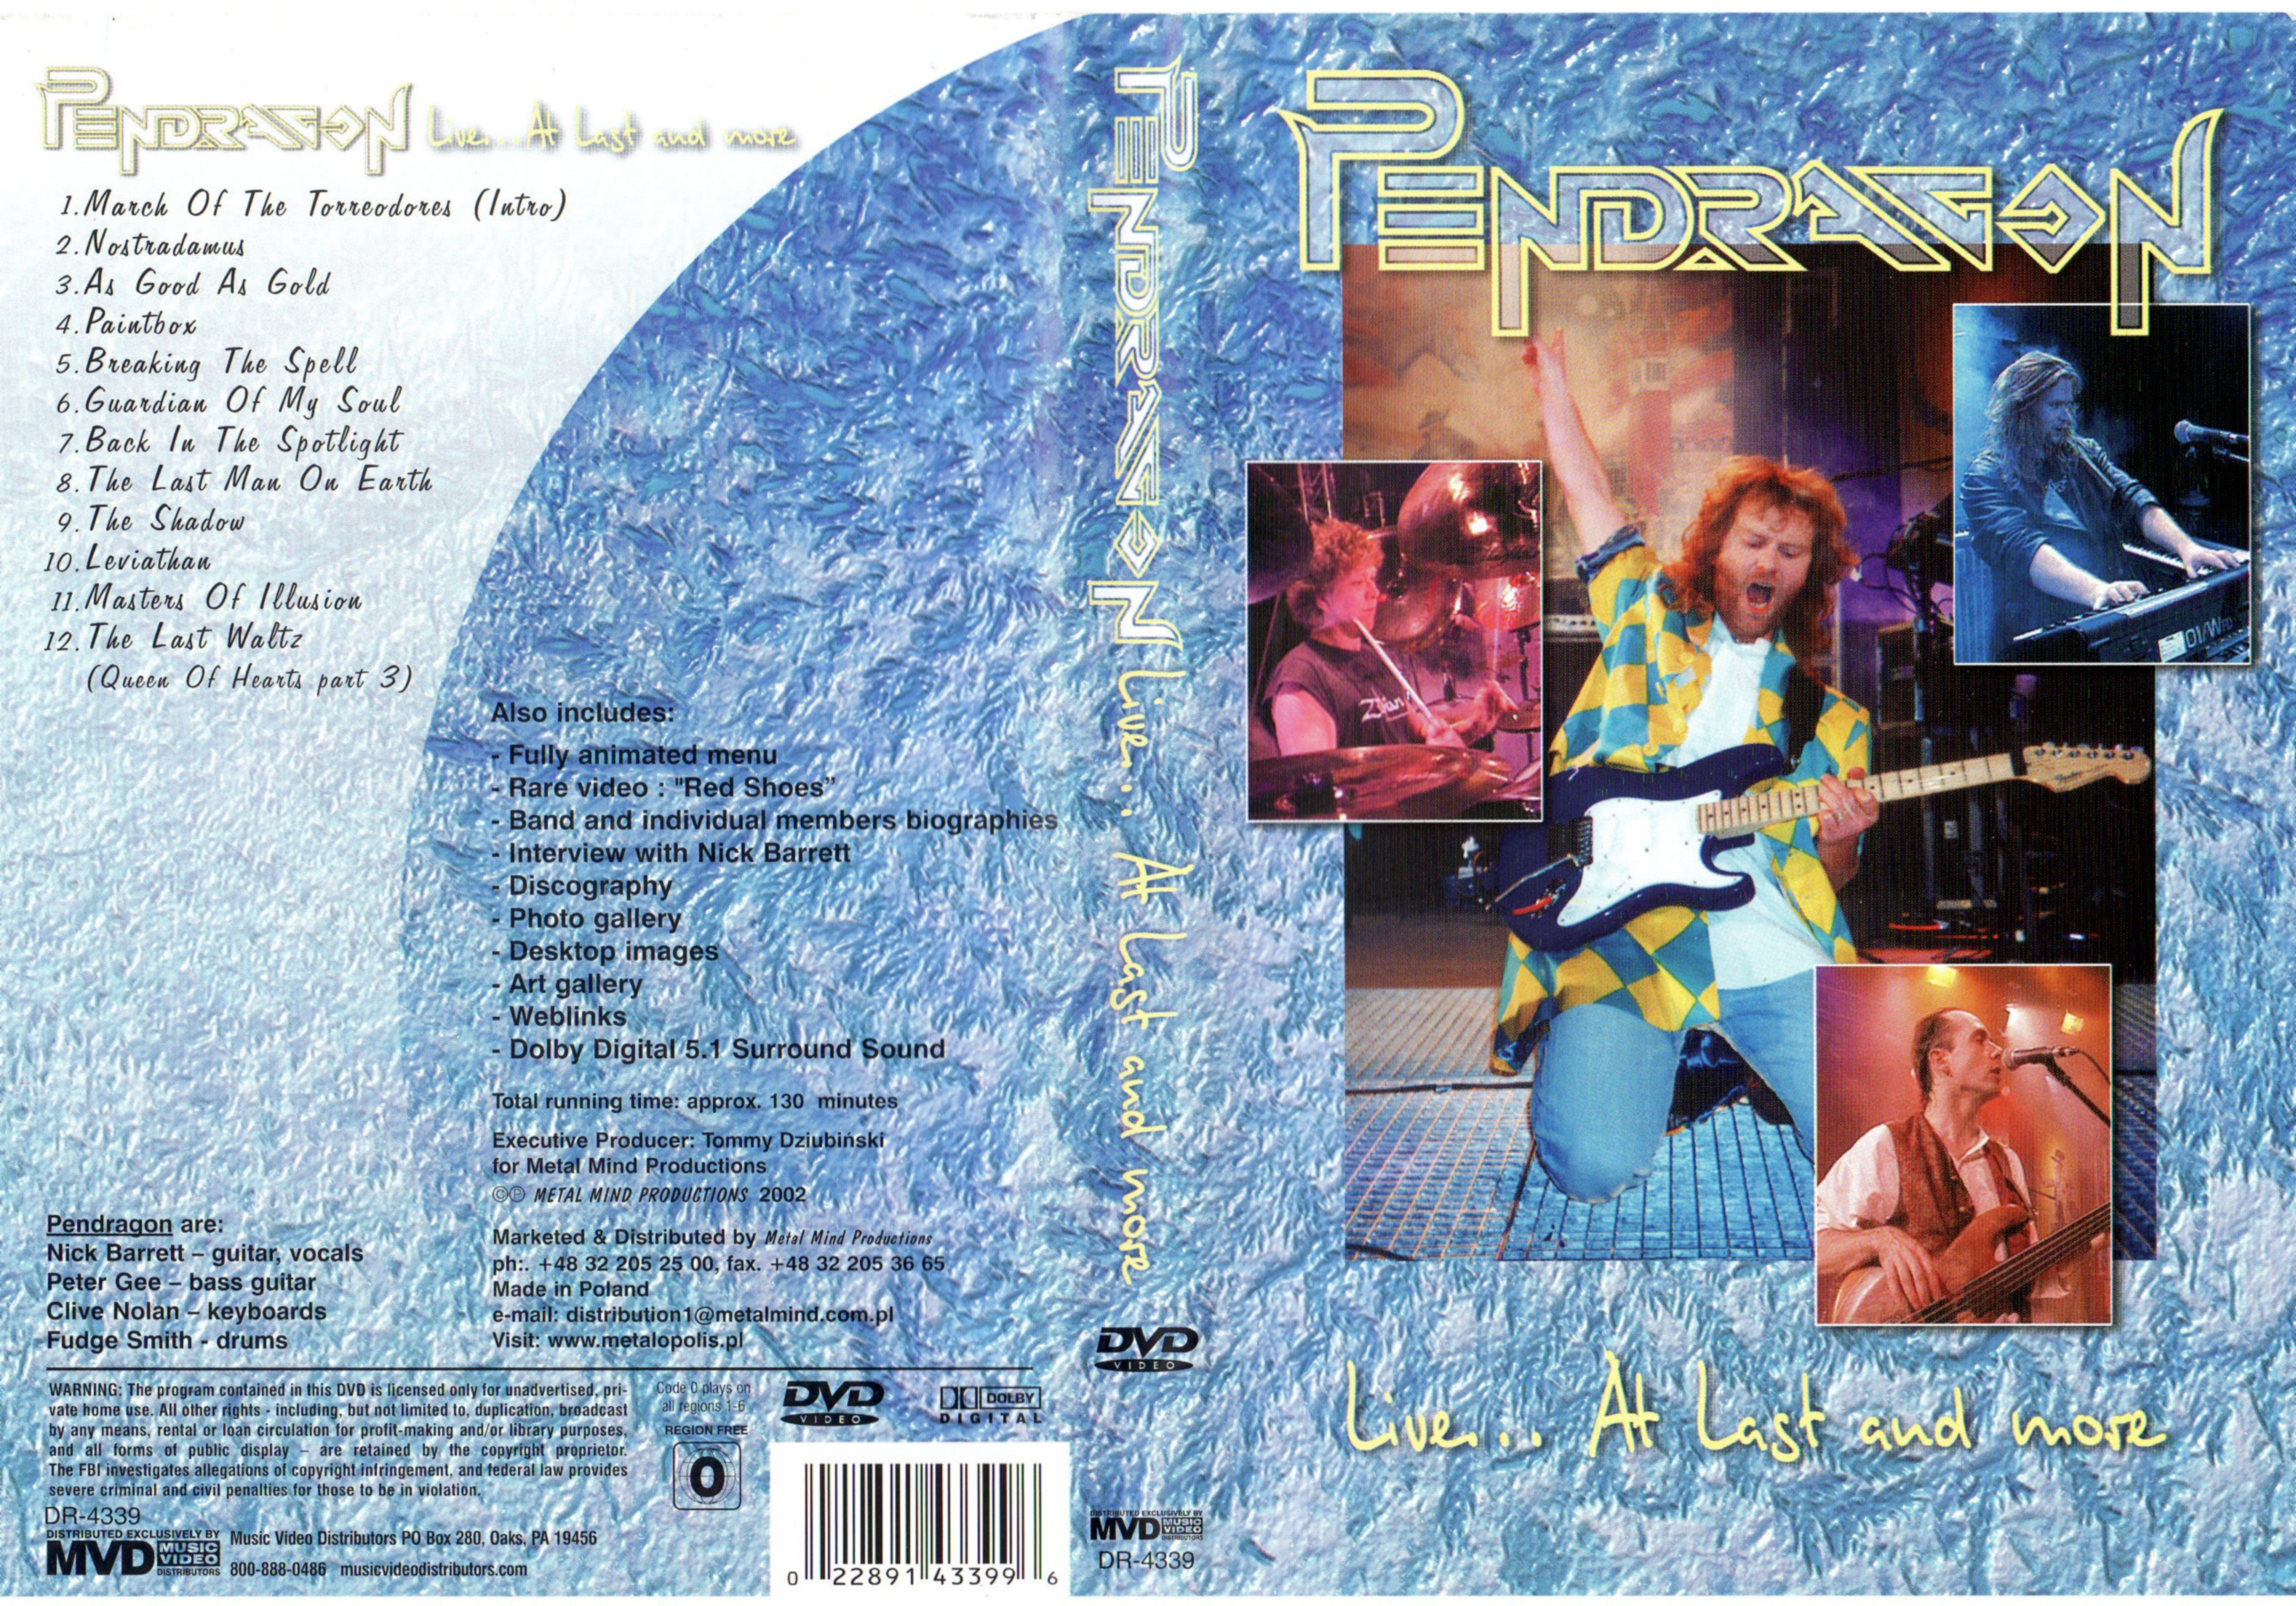 Jaquette DVD Pendragon Live at last and more